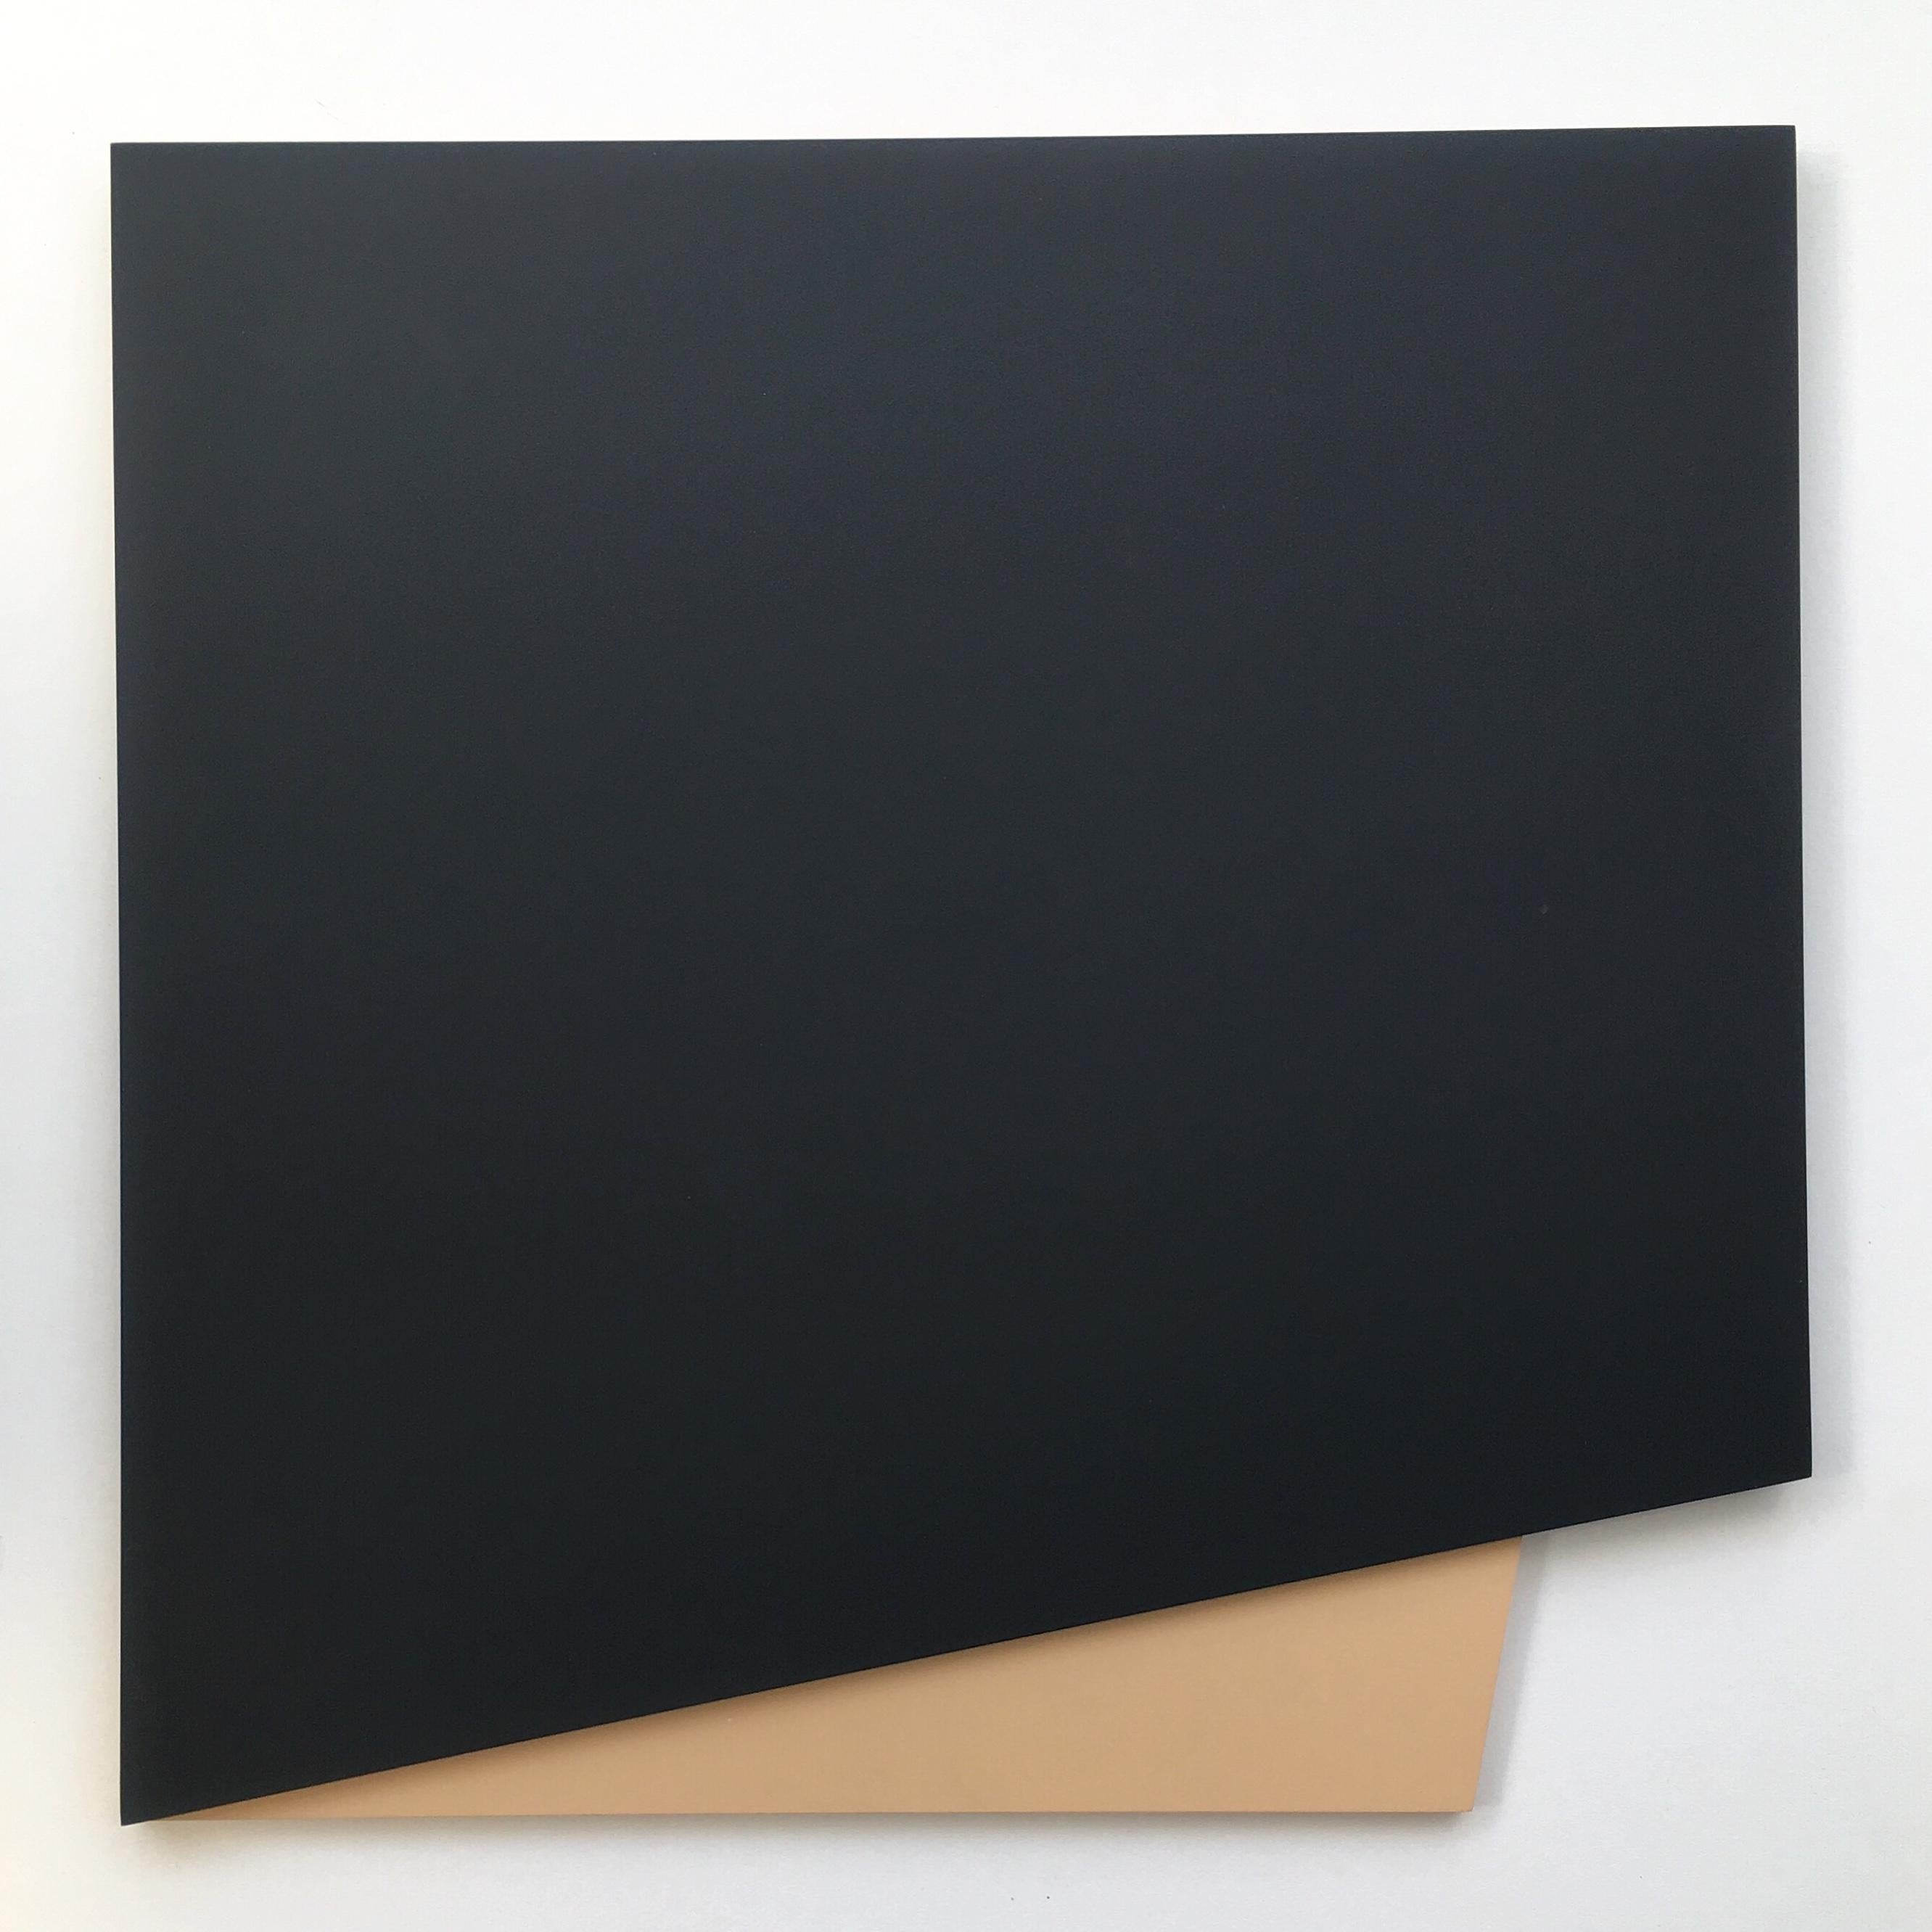 Cut Out 50 (series II), 2019, Wooden board and paint, each painting 19 7/10 × 19 7/10 × 1 3/5 in, 50 × 50 × 4 cm by Laura Jane Scott

Laura Jane Scott’s desire for formal simplicity through geometric form and striking use of colour has enabled her